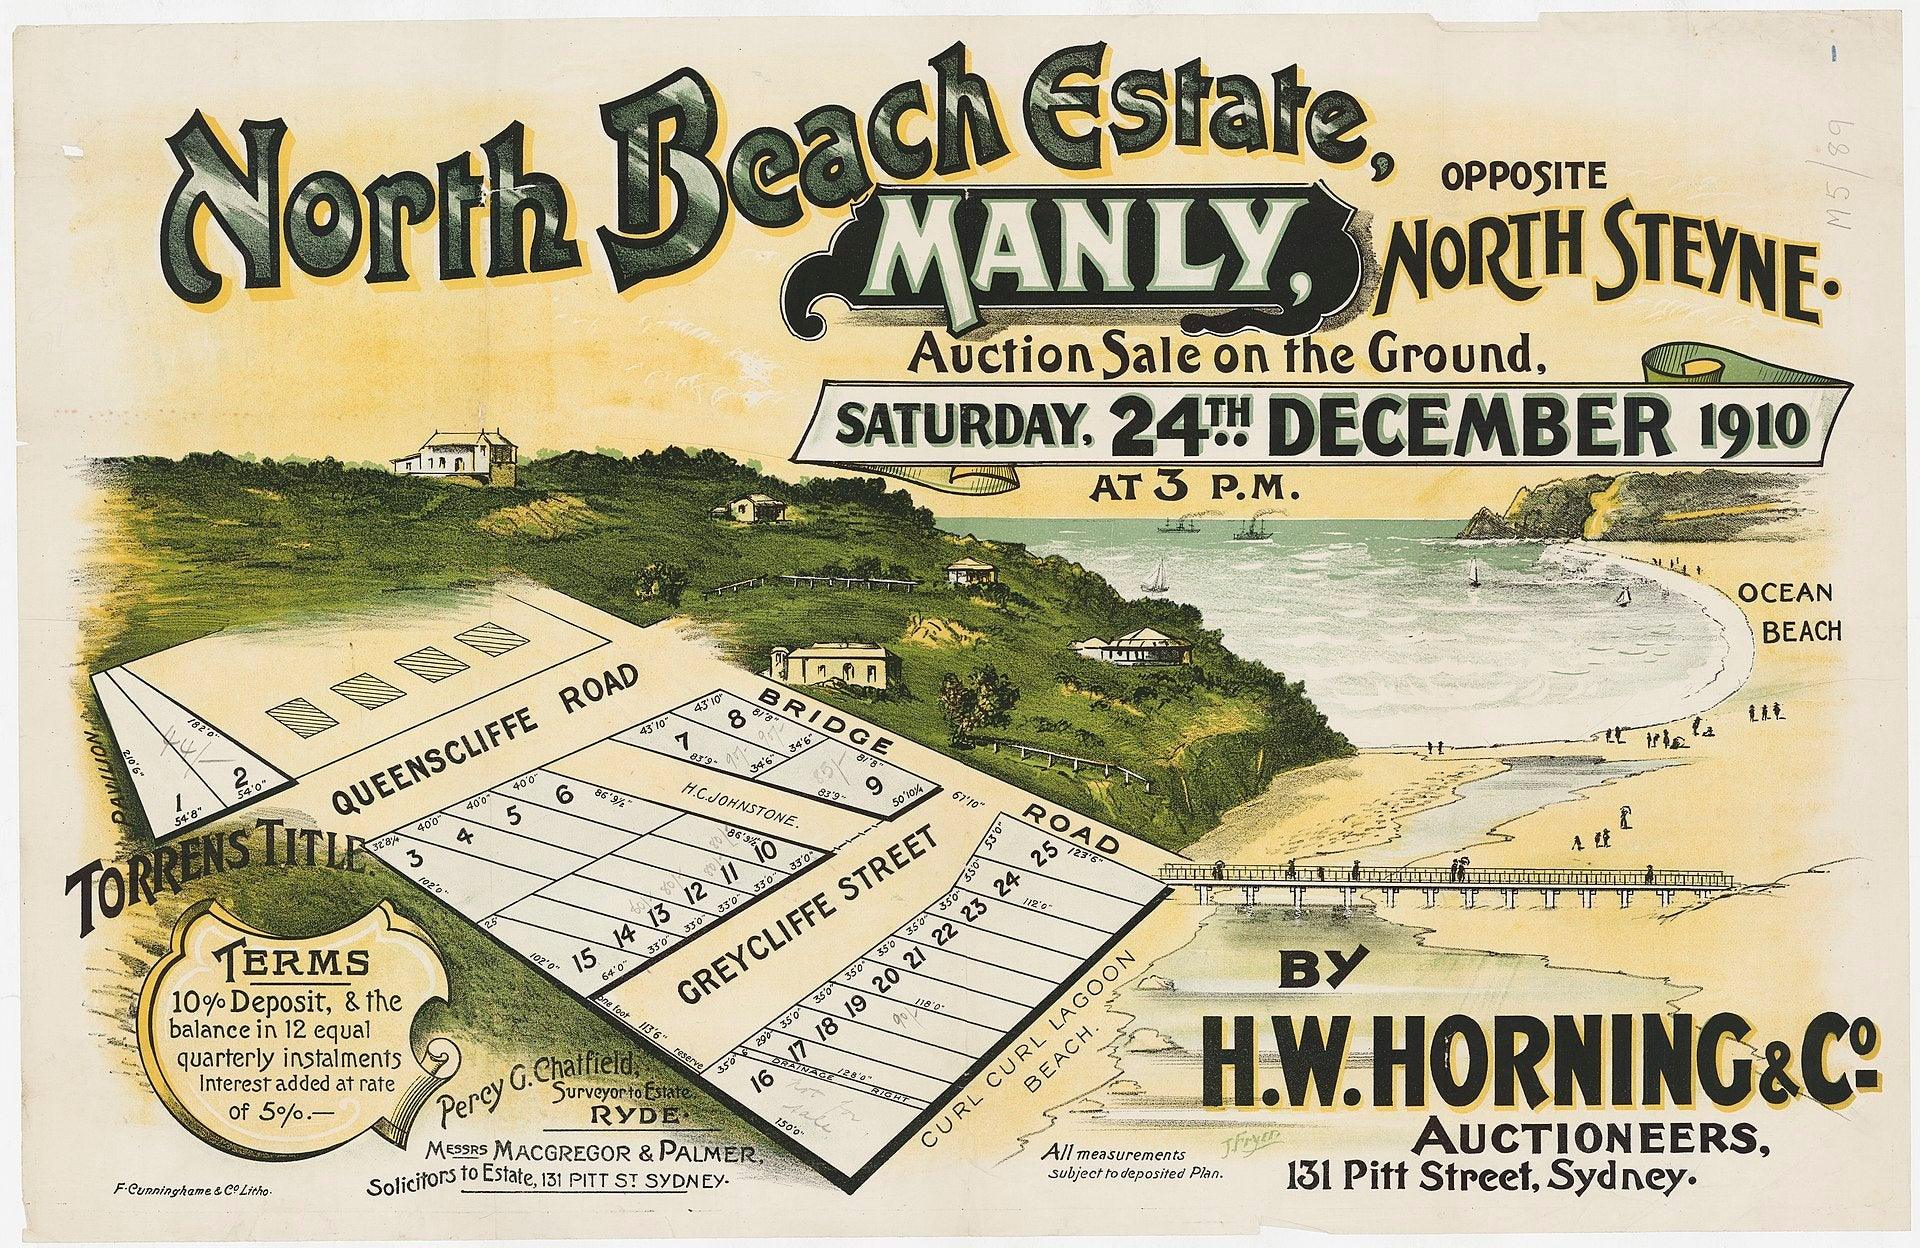 Vintage Poster Print North Beach Estate Manly, North Steyne Subdivision 1910 - Lost Manly Shop